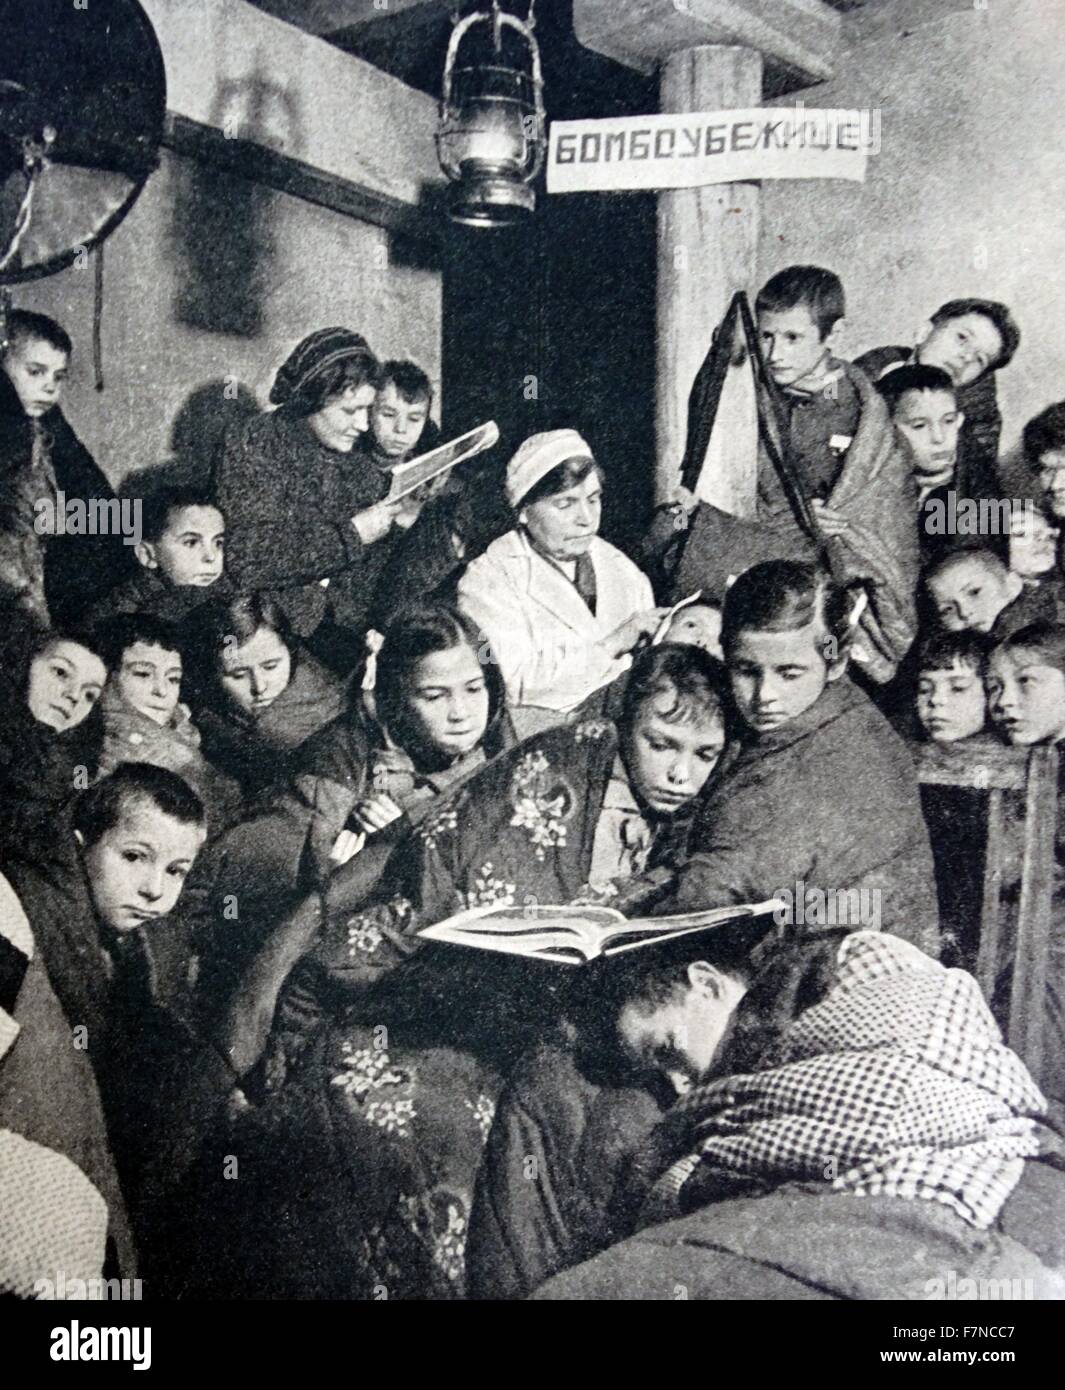 Bomb Shelter' says the notice on the pillar supporting the roof of this basement where children are gathered during one of Leningrad's frequent air raids alerts. Stock Photo